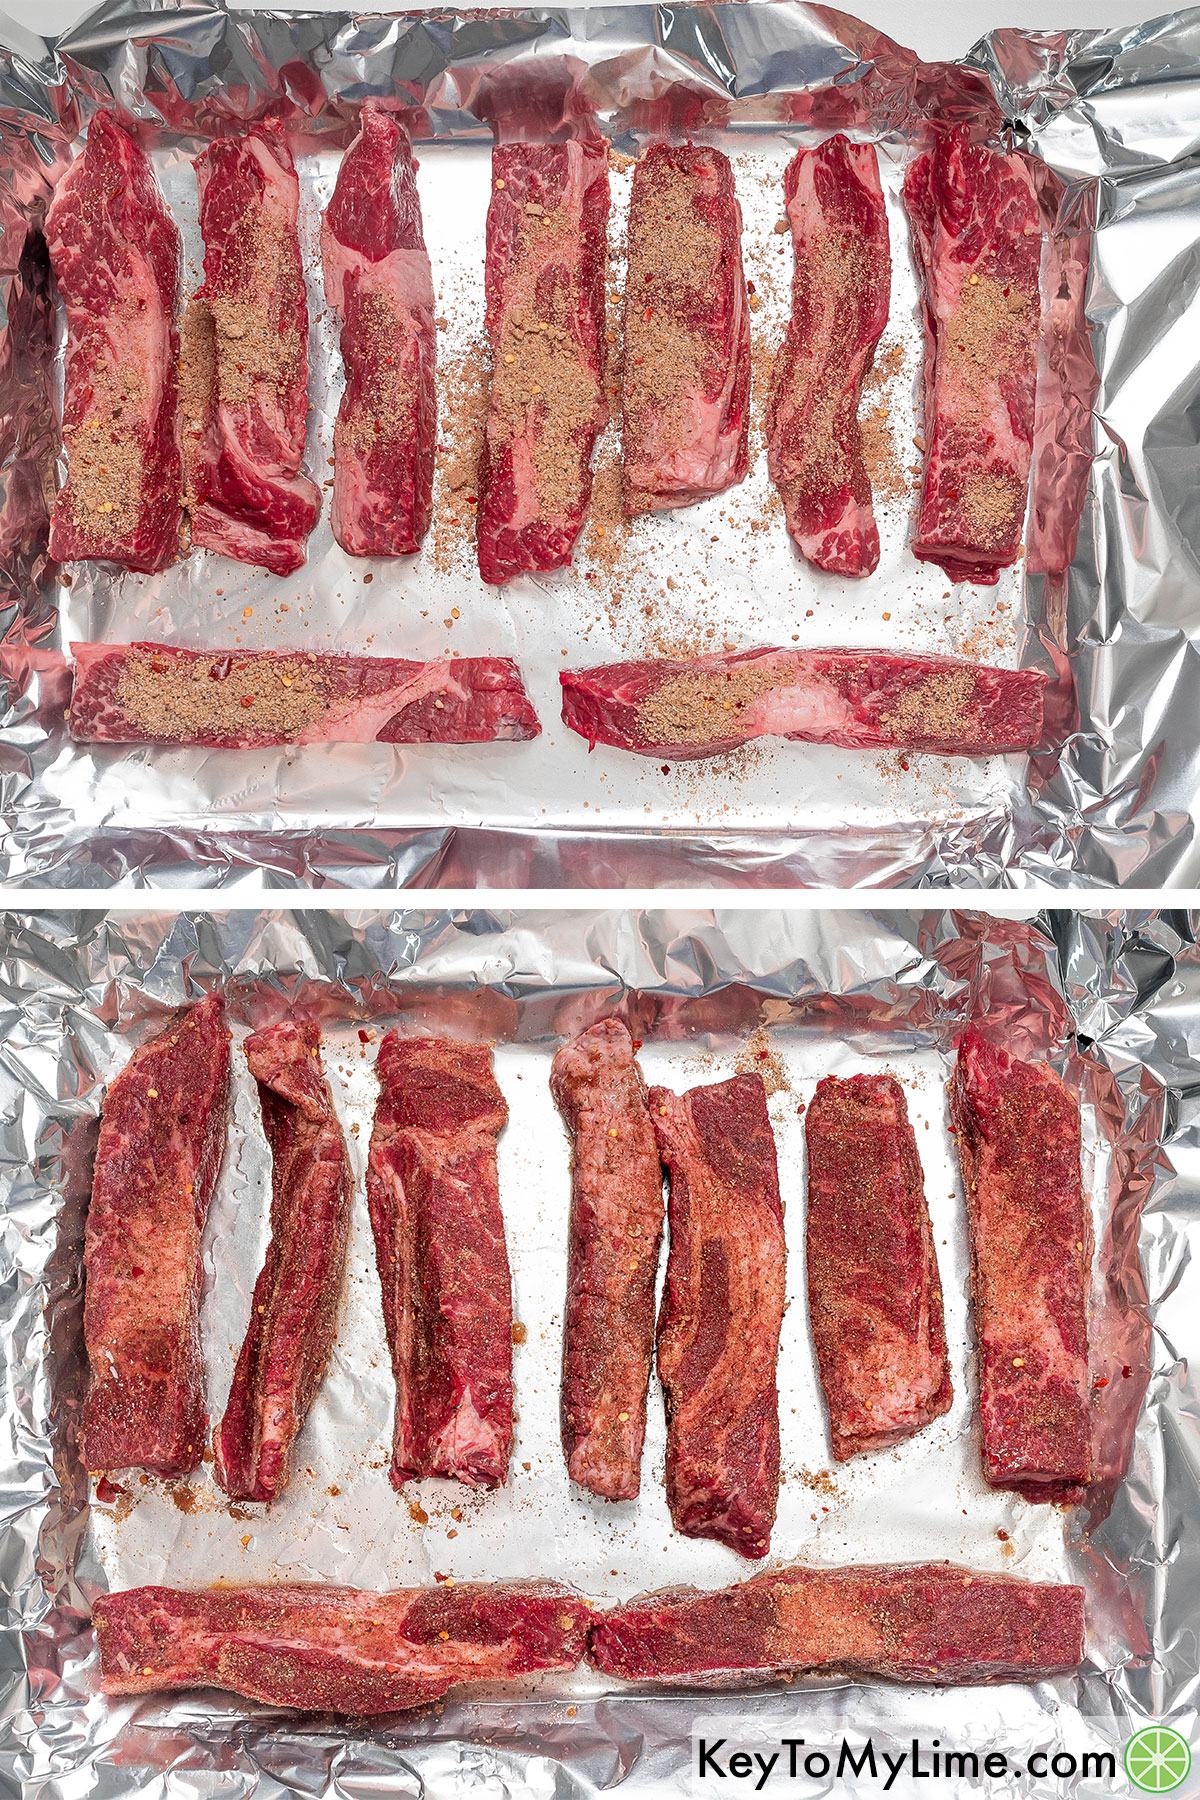 Laying the beef ribs on a lined baking sheet, and then applying the dry rub to all sides.